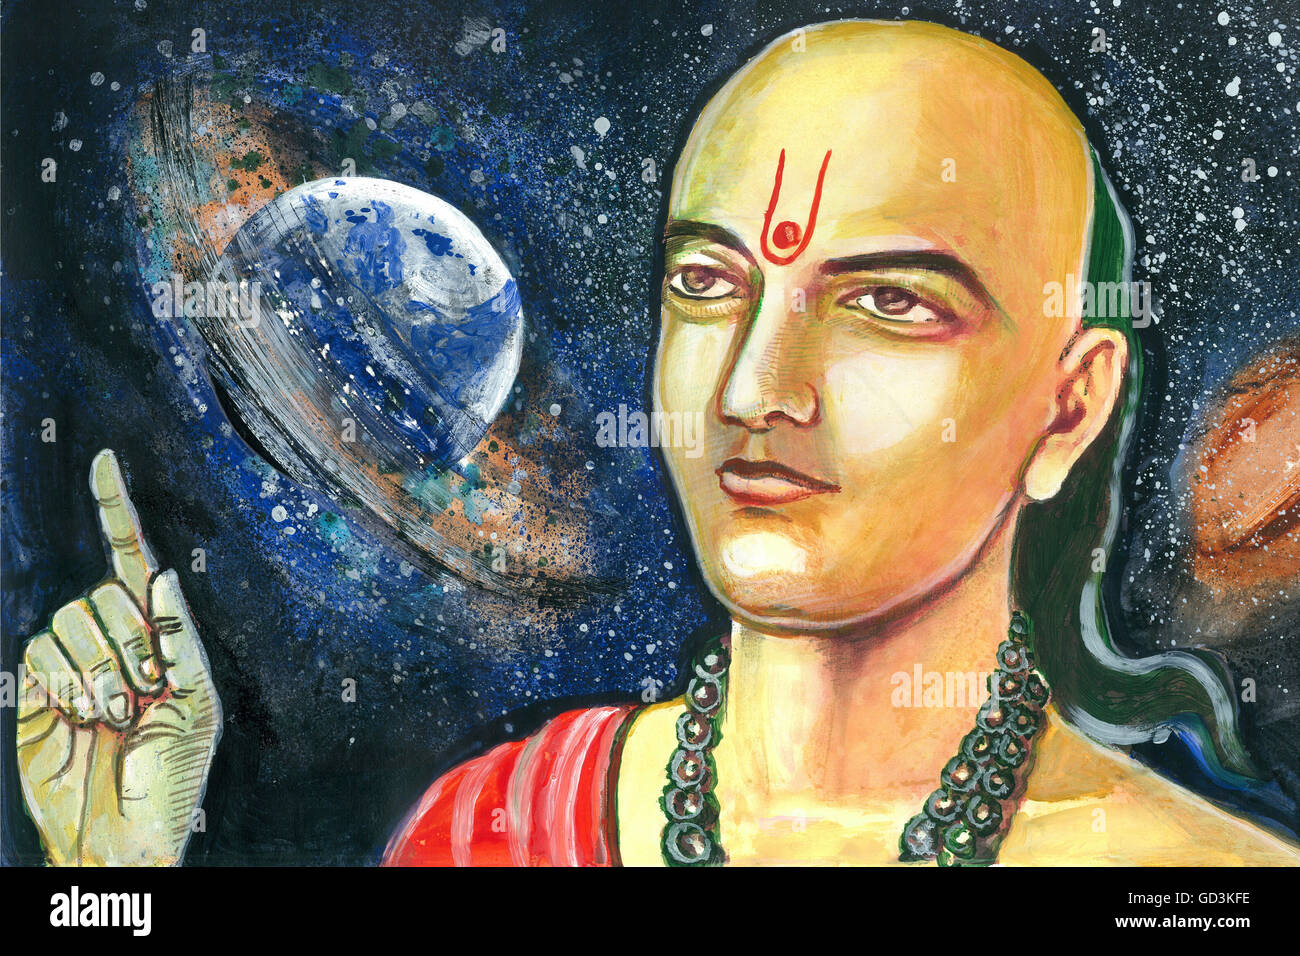 Who was Aryabhata and what was his contribution? - Quora